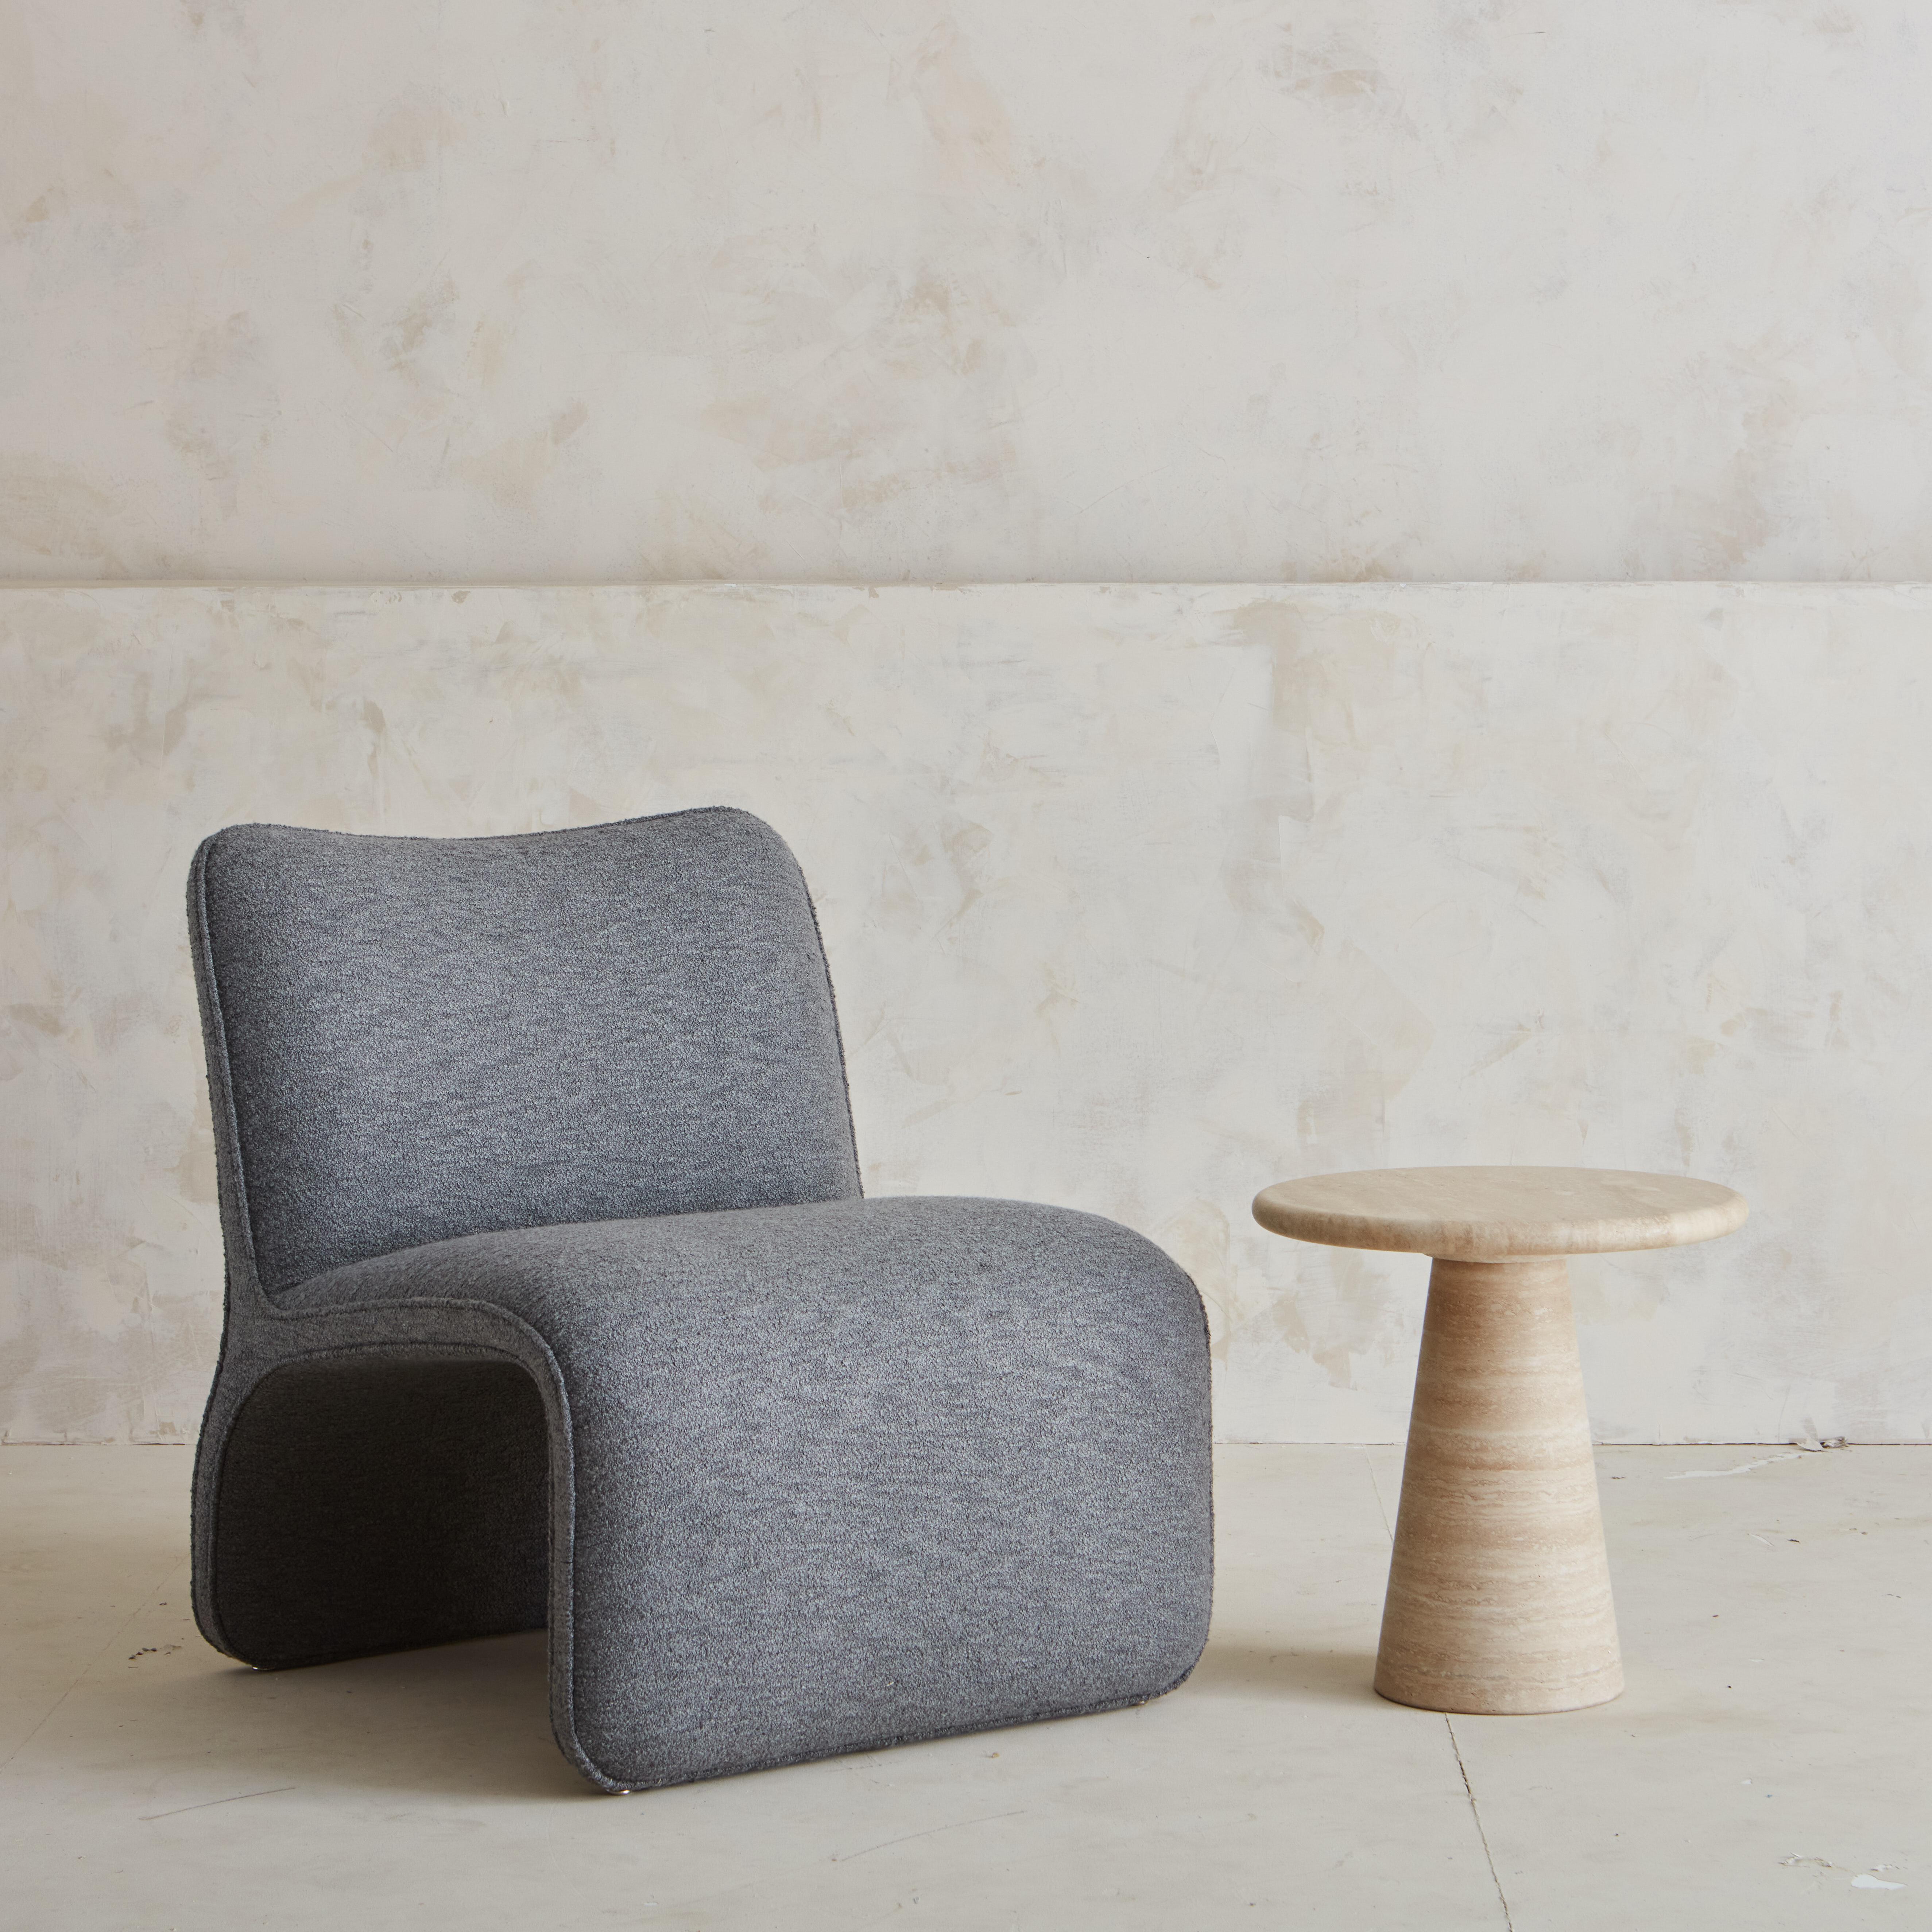 Sculptural Lounge Chair in Gray Wool Attributed to Vladimir Kagan for Preview  6